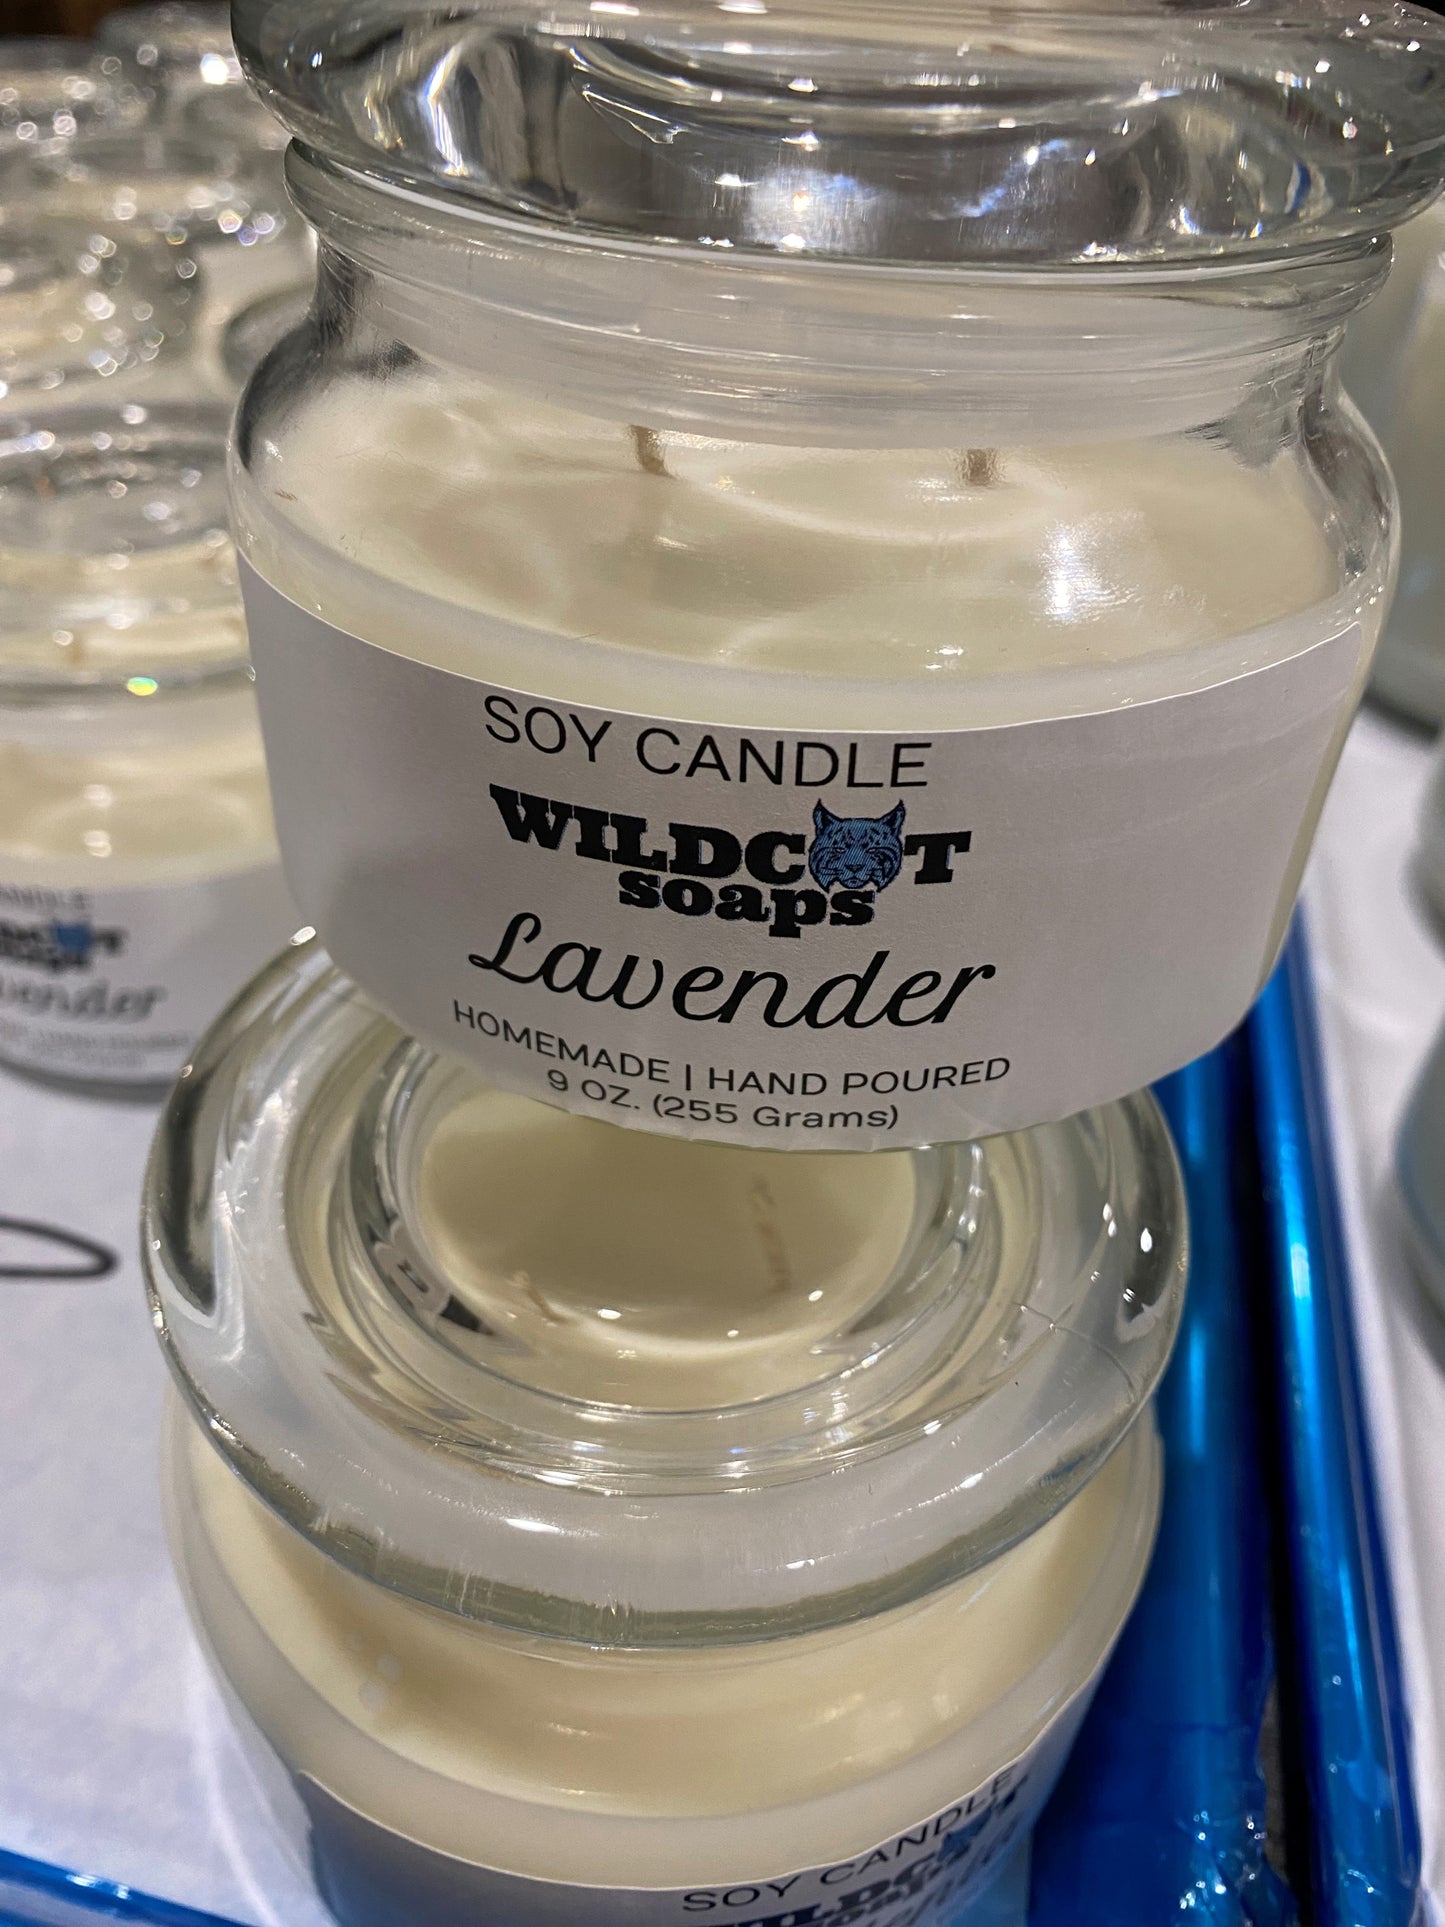 Lavender Scented Candles